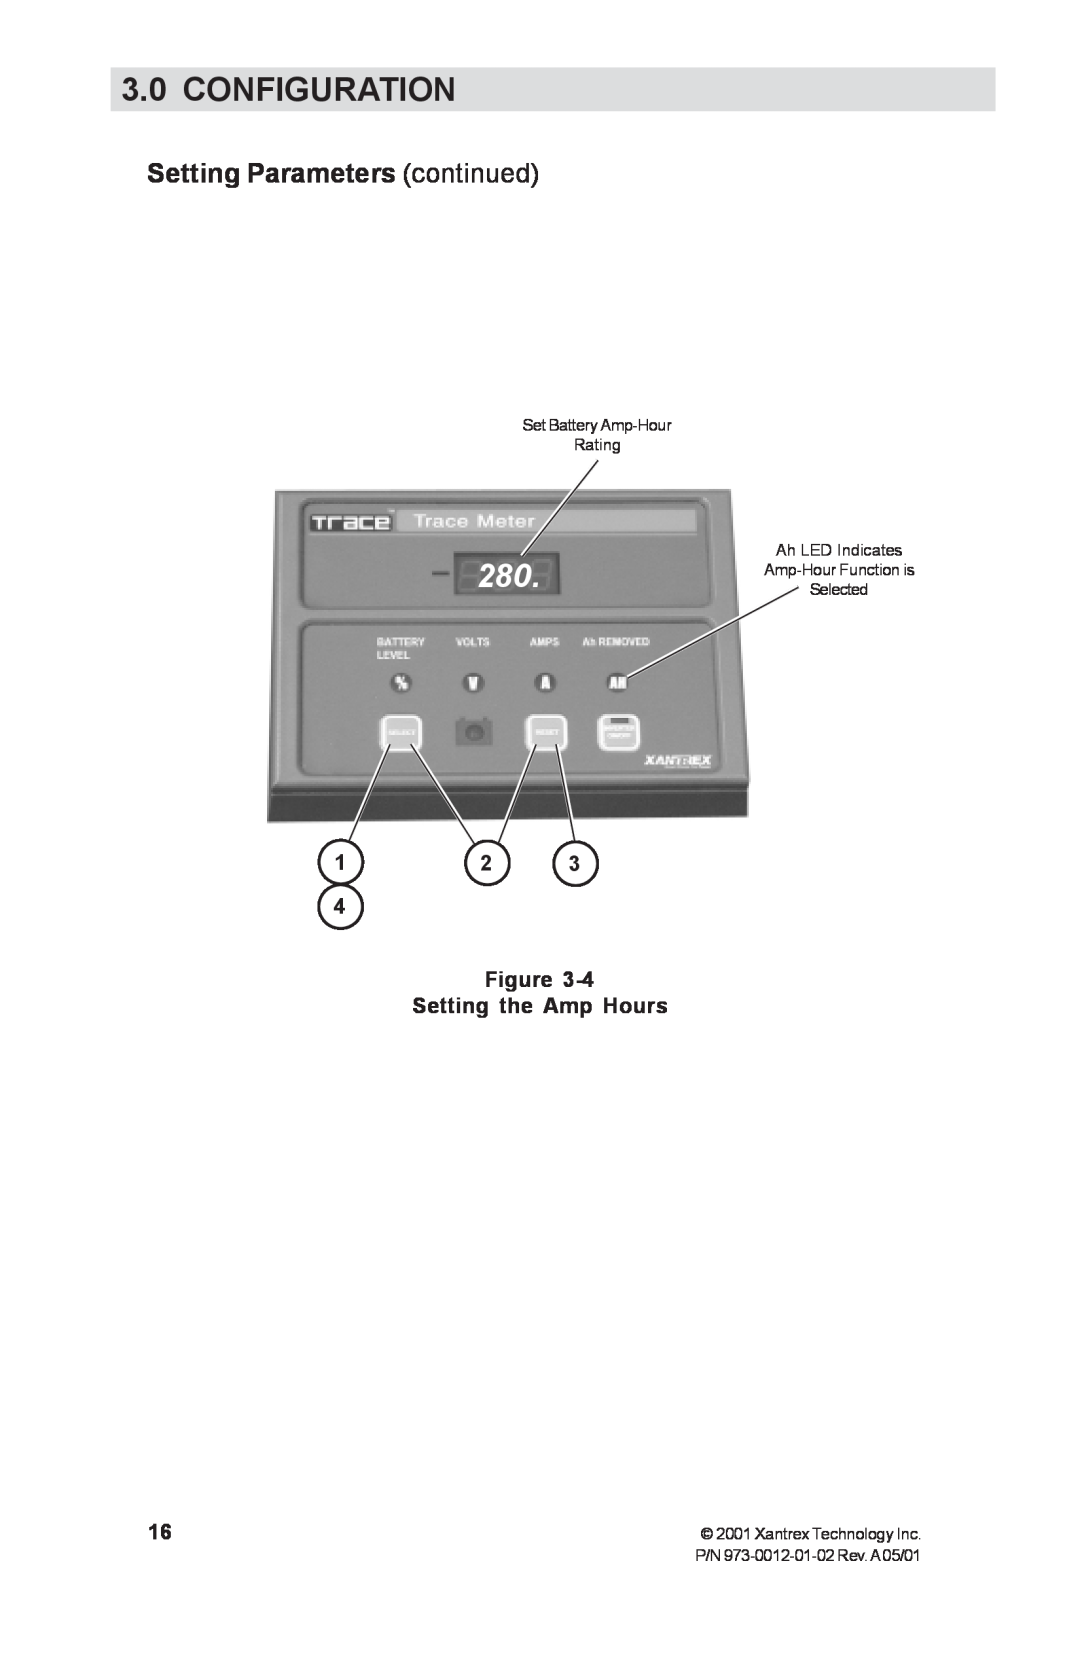 Xantrex Technology TM500A manual Setting Parameters continued, Setting the Amp Hours, Configuration, Xantrex Technology Inc 